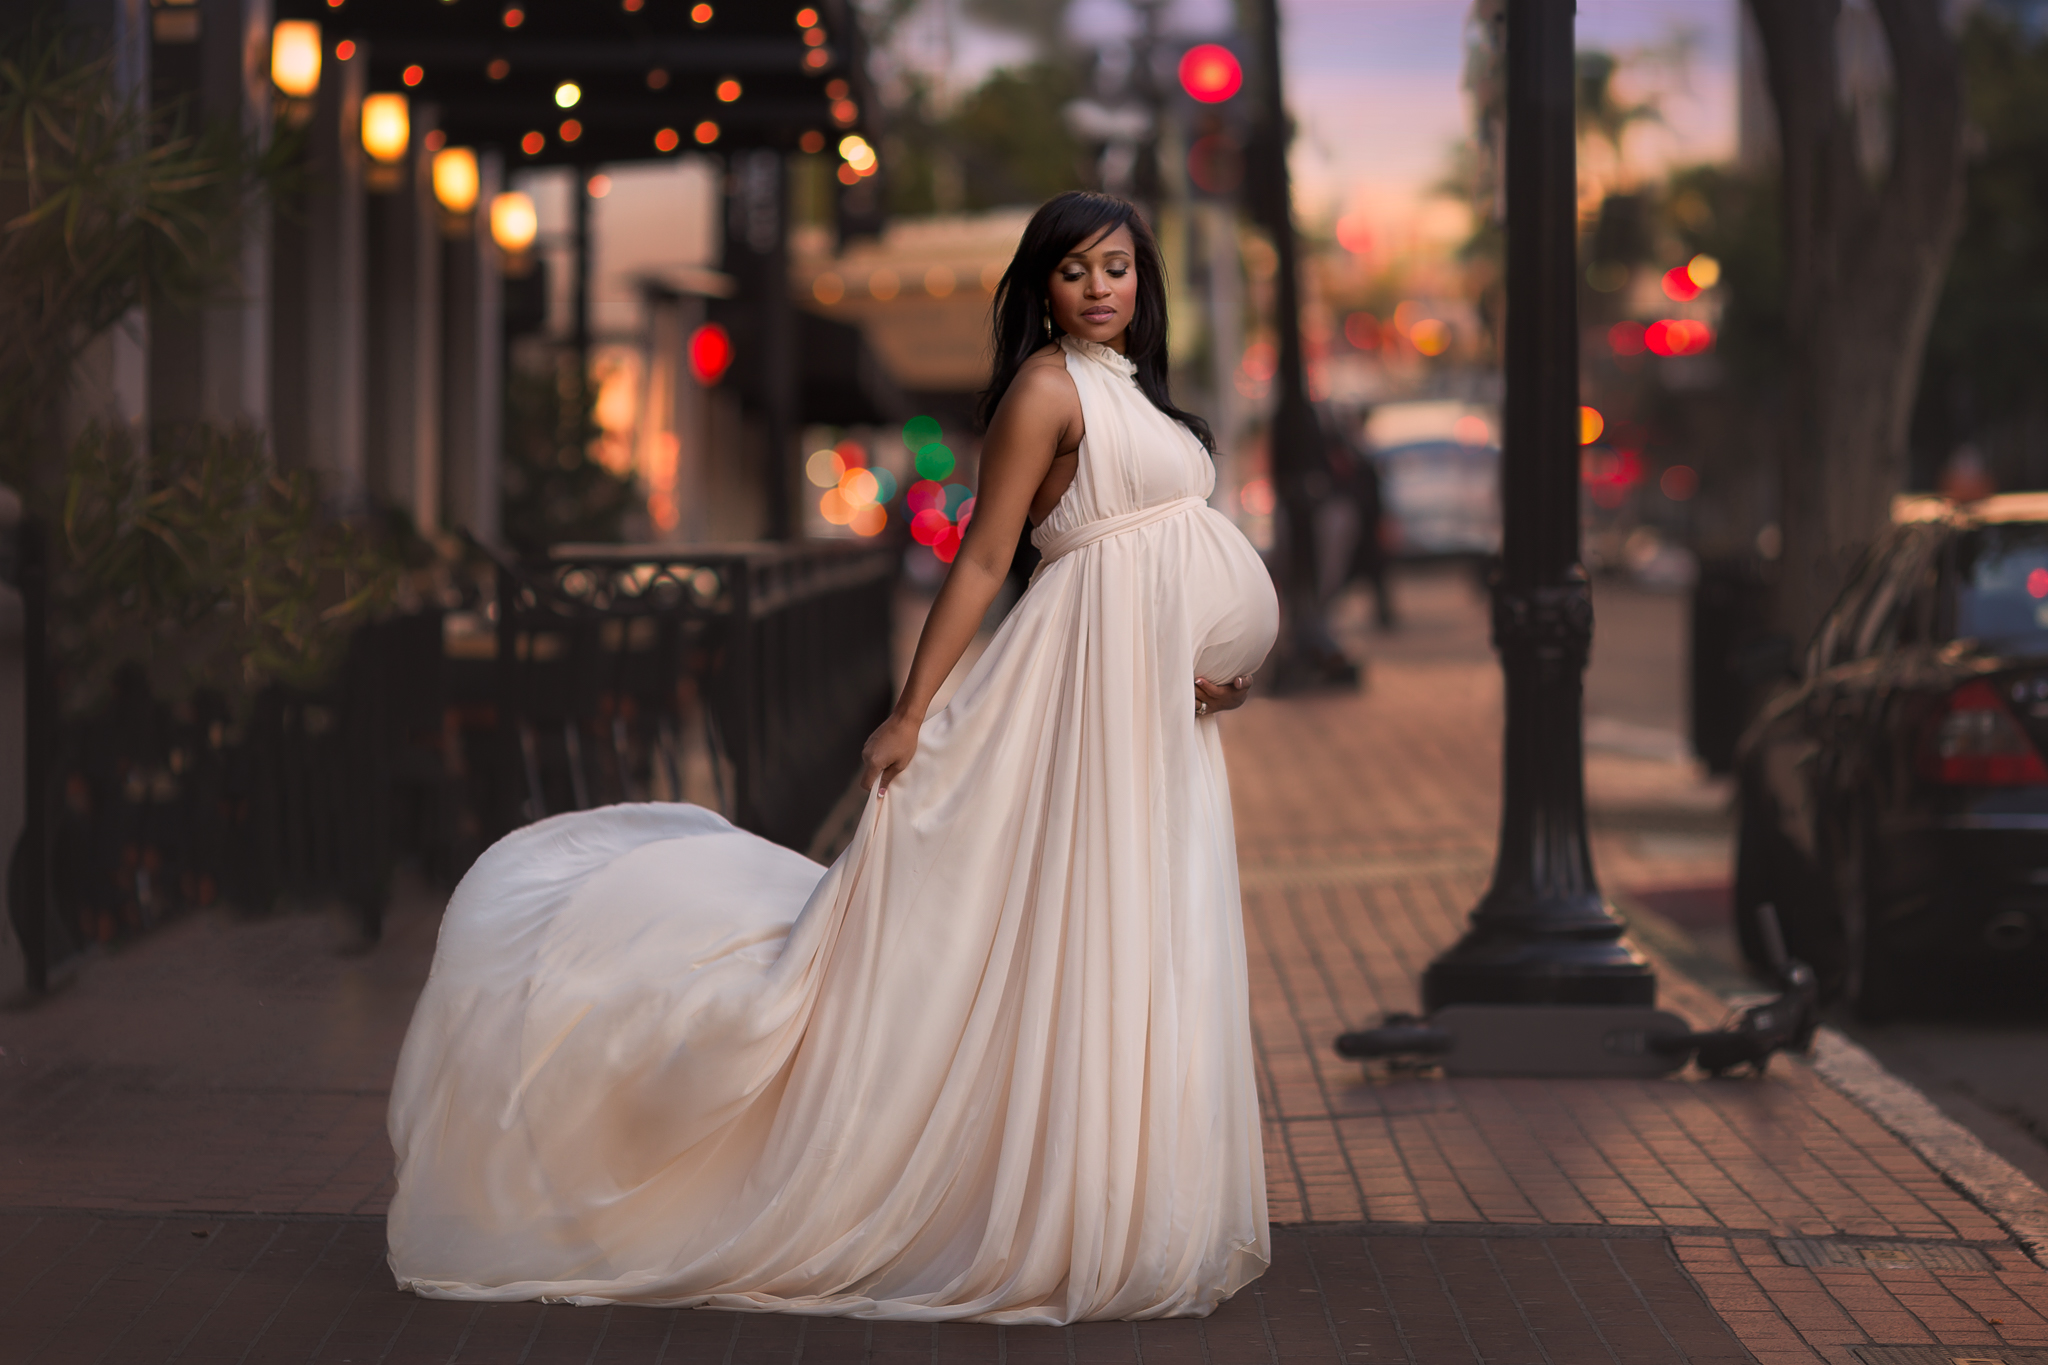 downtown-maternity-sesion-10.jpg